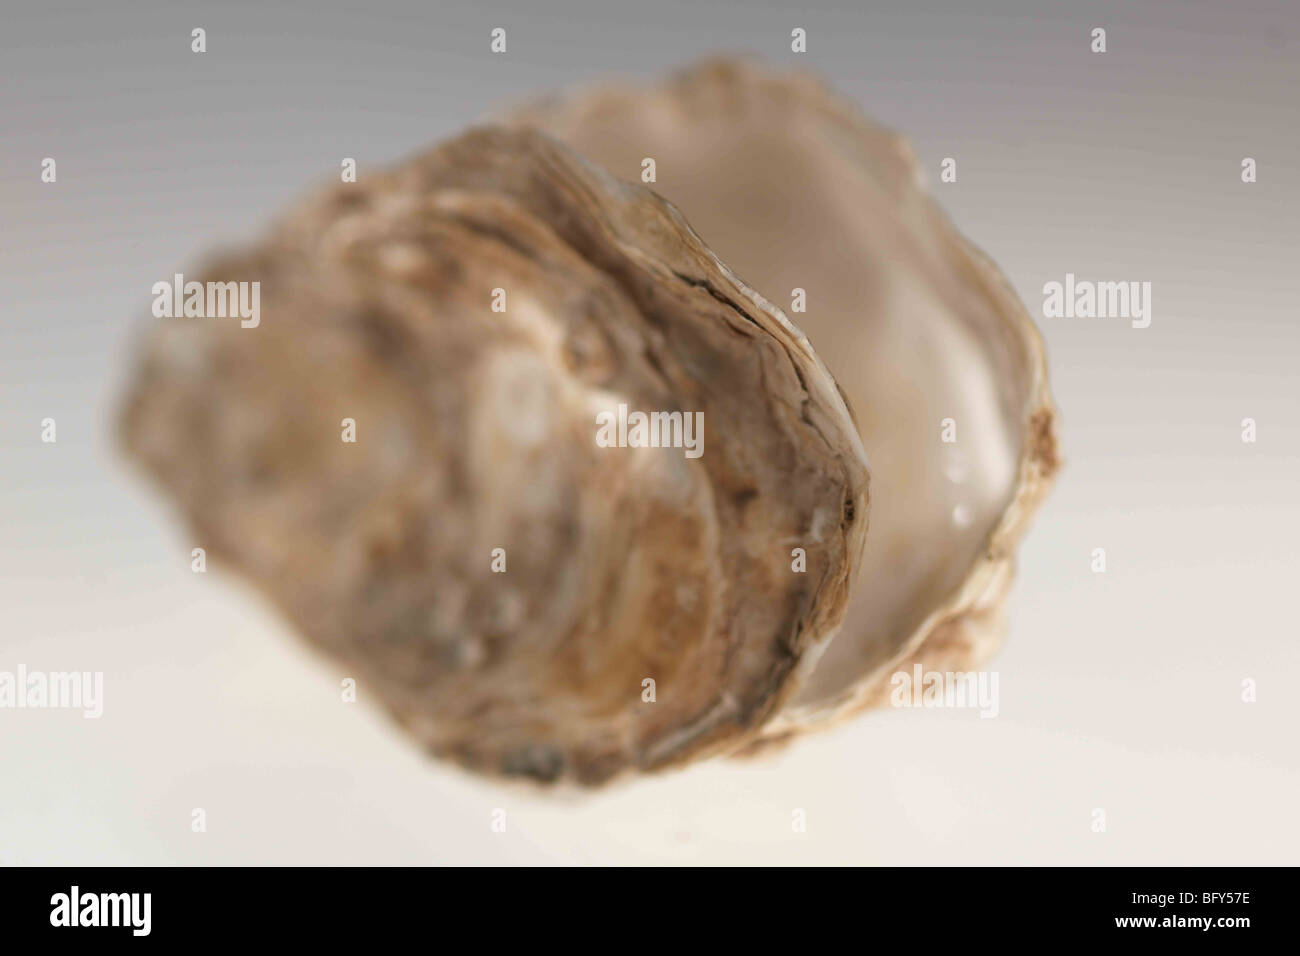 An open Oyster, Oyster shell on white/grey background / Cut Out Stock Photo